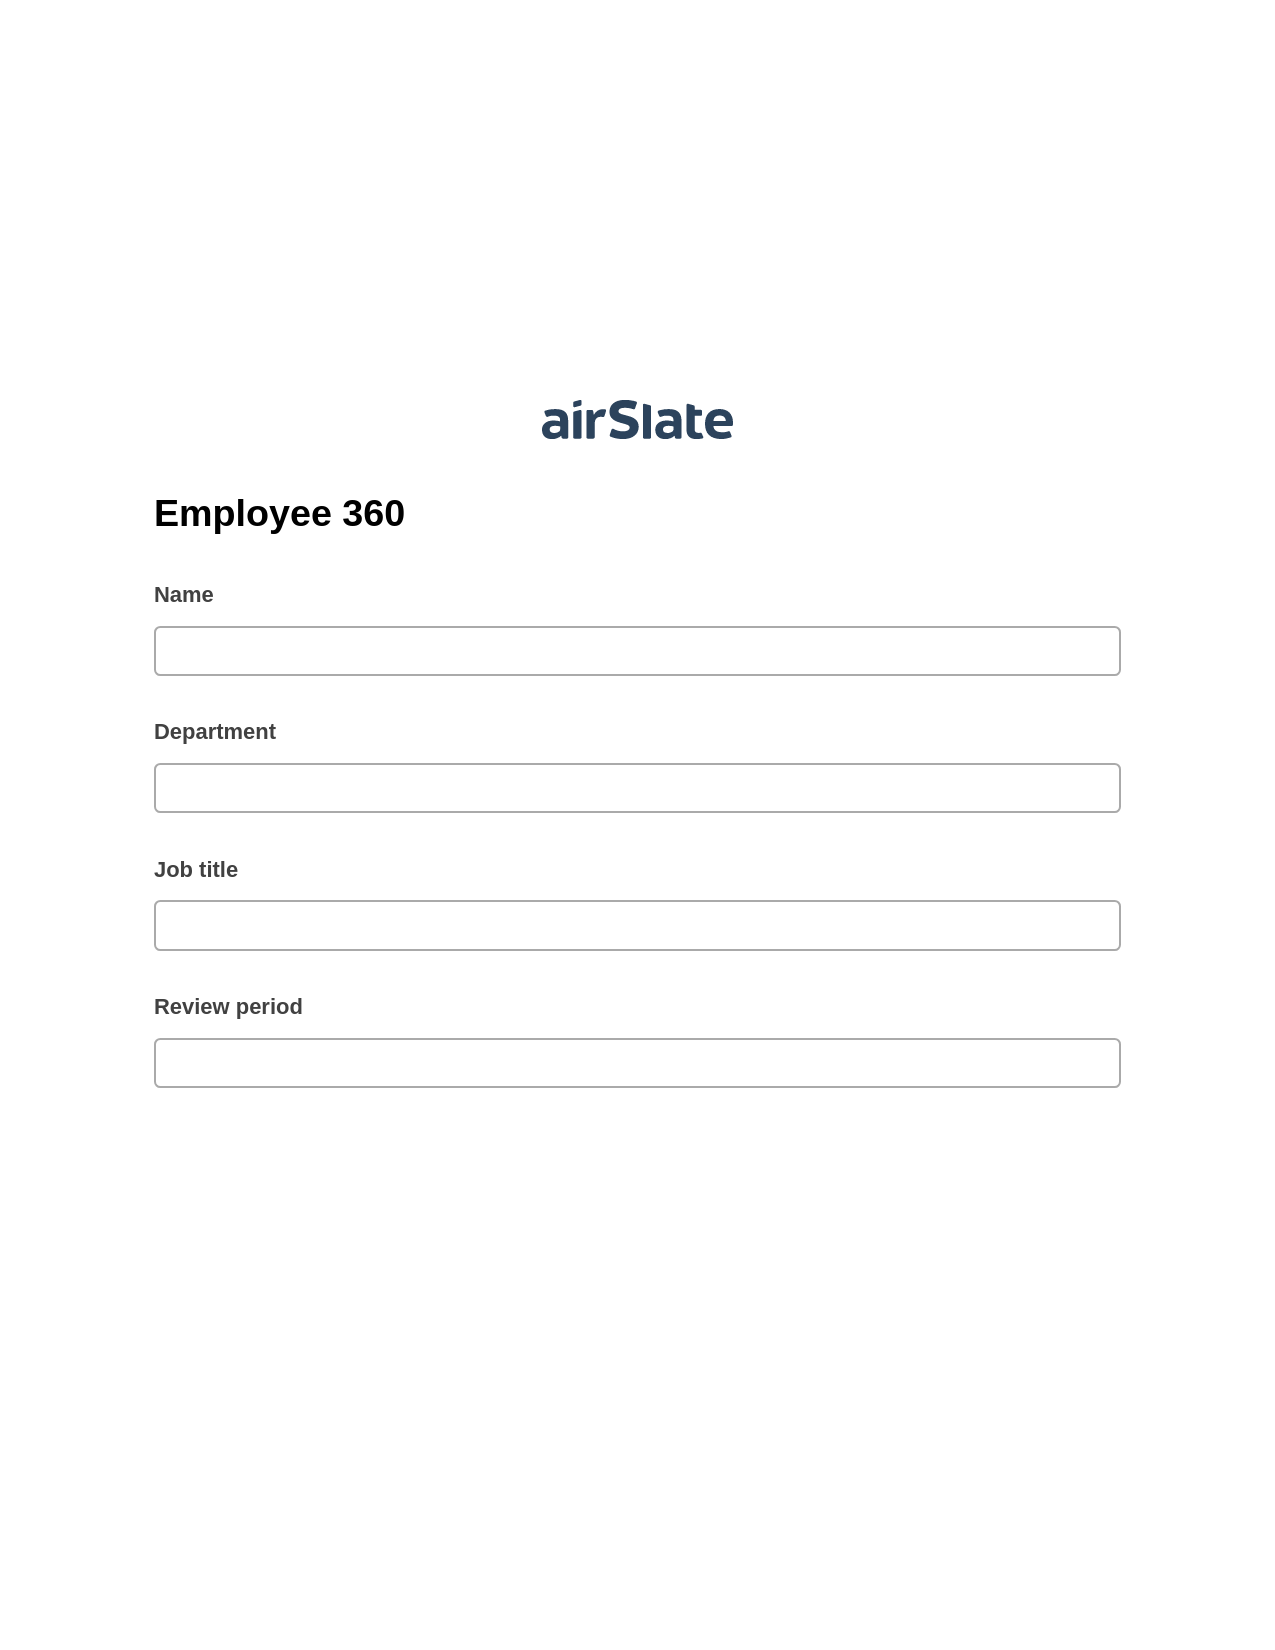 Employee 360 Pre-fill from Smartsheet Bot, Update MS Dynamics 365 Record Bot, Export to WebMerge Bot